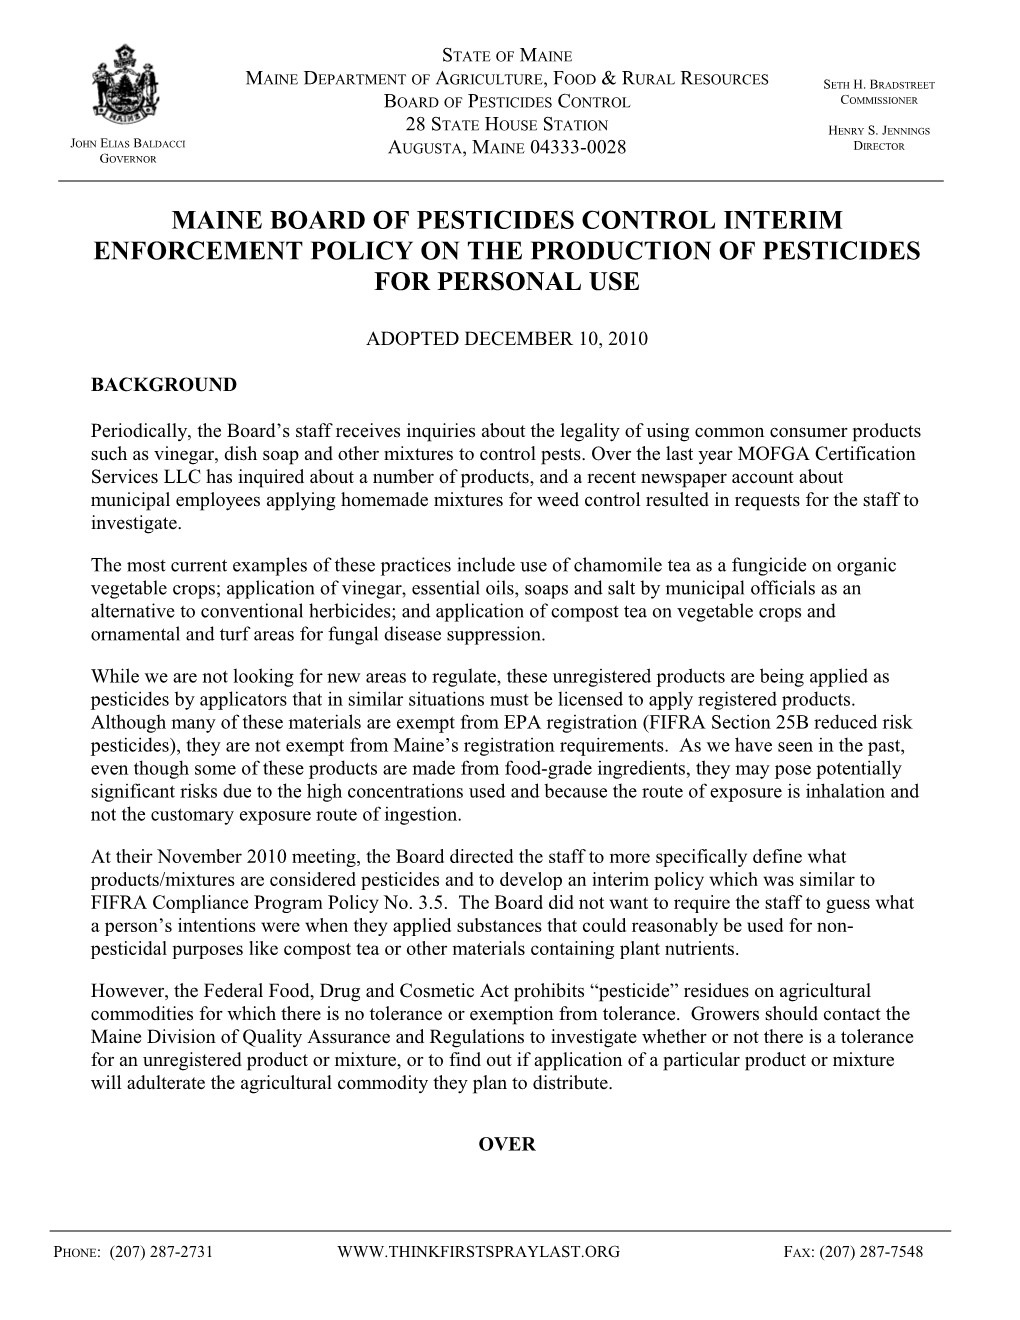 MAINE BOARD of PESTICIDES Controlinterim Enforcementpolicy on the PRODUCTION of PESTICIDES